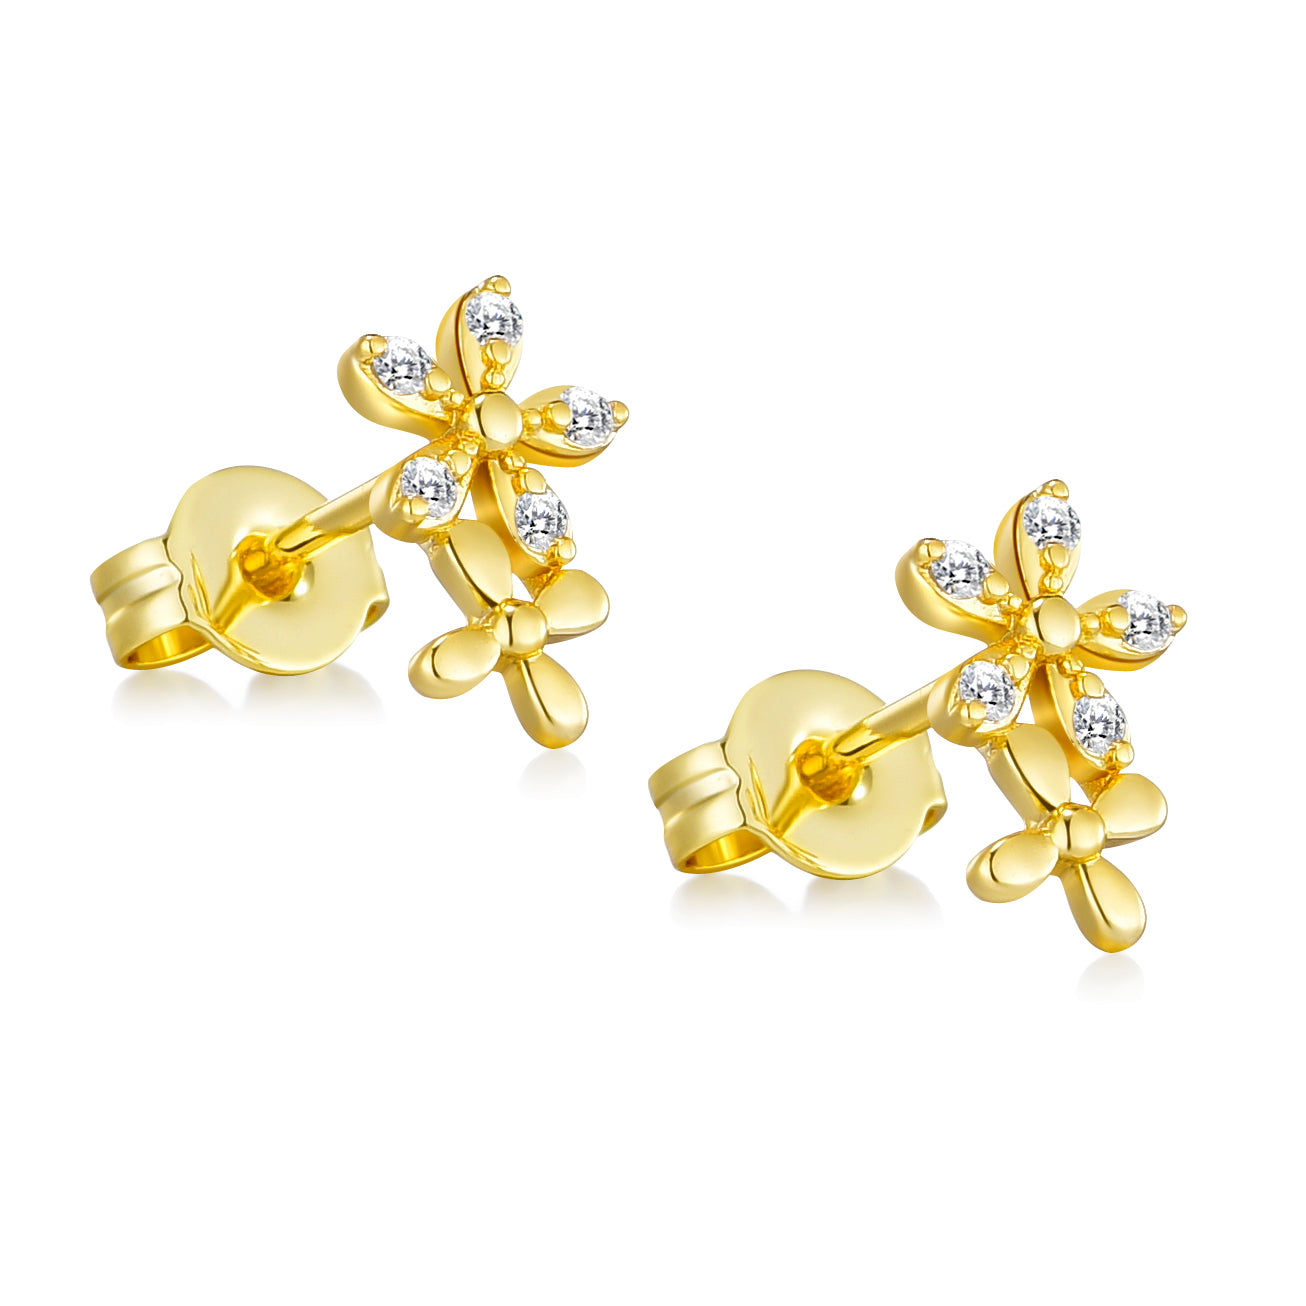 Gold Plated Flower Earrings Created with Zircondia® Crystals by Philip Jones Jewellery